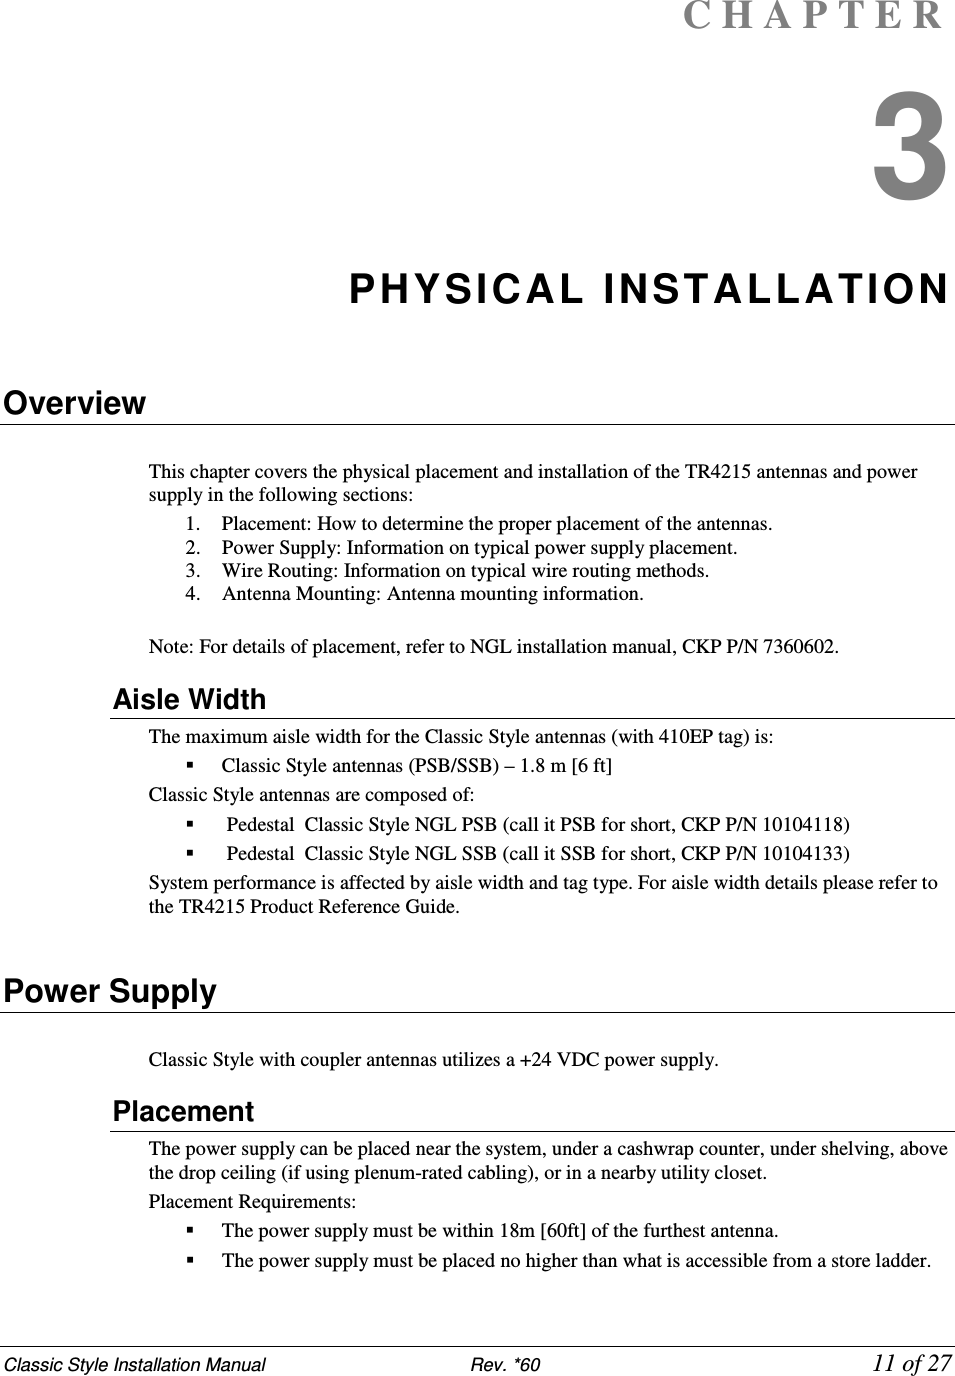 Classic Style Installation Manual                           Rev. *60             11 of 27 C H A P T E R  3 PHYSICAL INSTALLATION  Overview  This chapter covers the physical placement and installation of the TR4215 antennas and power supply in the following sections:  1. Placement: How to determine the proper placement of the antennas.  2. Power Supply: Information on typical power supply placement.  3. Wire Routing: Information on typical wire routing methods.  4. Antenna Mounting: Antenna mounting information.  Note: For details of placement, refer to NGL installation manual, CKP P/N 7360602. Aisle Width The maximum aisle width for the Classic Style antennas (with 410EP tag) is:   Classic Style antennas (PSB/SSB) – 1.8 m [6 ft] Classic Style antennas are composed of:   Pedestal  Classic Style NGL PSB (call it PSB for short, CKP P/N 10104118)   Pedestal  Classic Style NGL SSB (call it SSB for short, CKP P/N 10104133) System performance is affected by aisle width and tag type. For aisle width details please refer to the TR4215 Product Reference Guide.  Power Supply  Classic Style with coupler antennas utilizes a +24 VDC power supply. Placement The power supply can be placed near the system, under a cashwrap counter, under shelving, above the drop ceiling (if using plenum-rated cabling), or in a nearby utility closet. Placement Requirements:   The power supply must be within 18m [60ft] of the furthest antenna.   The power supply must be placed no higher than what is accessible from a store ladder. 